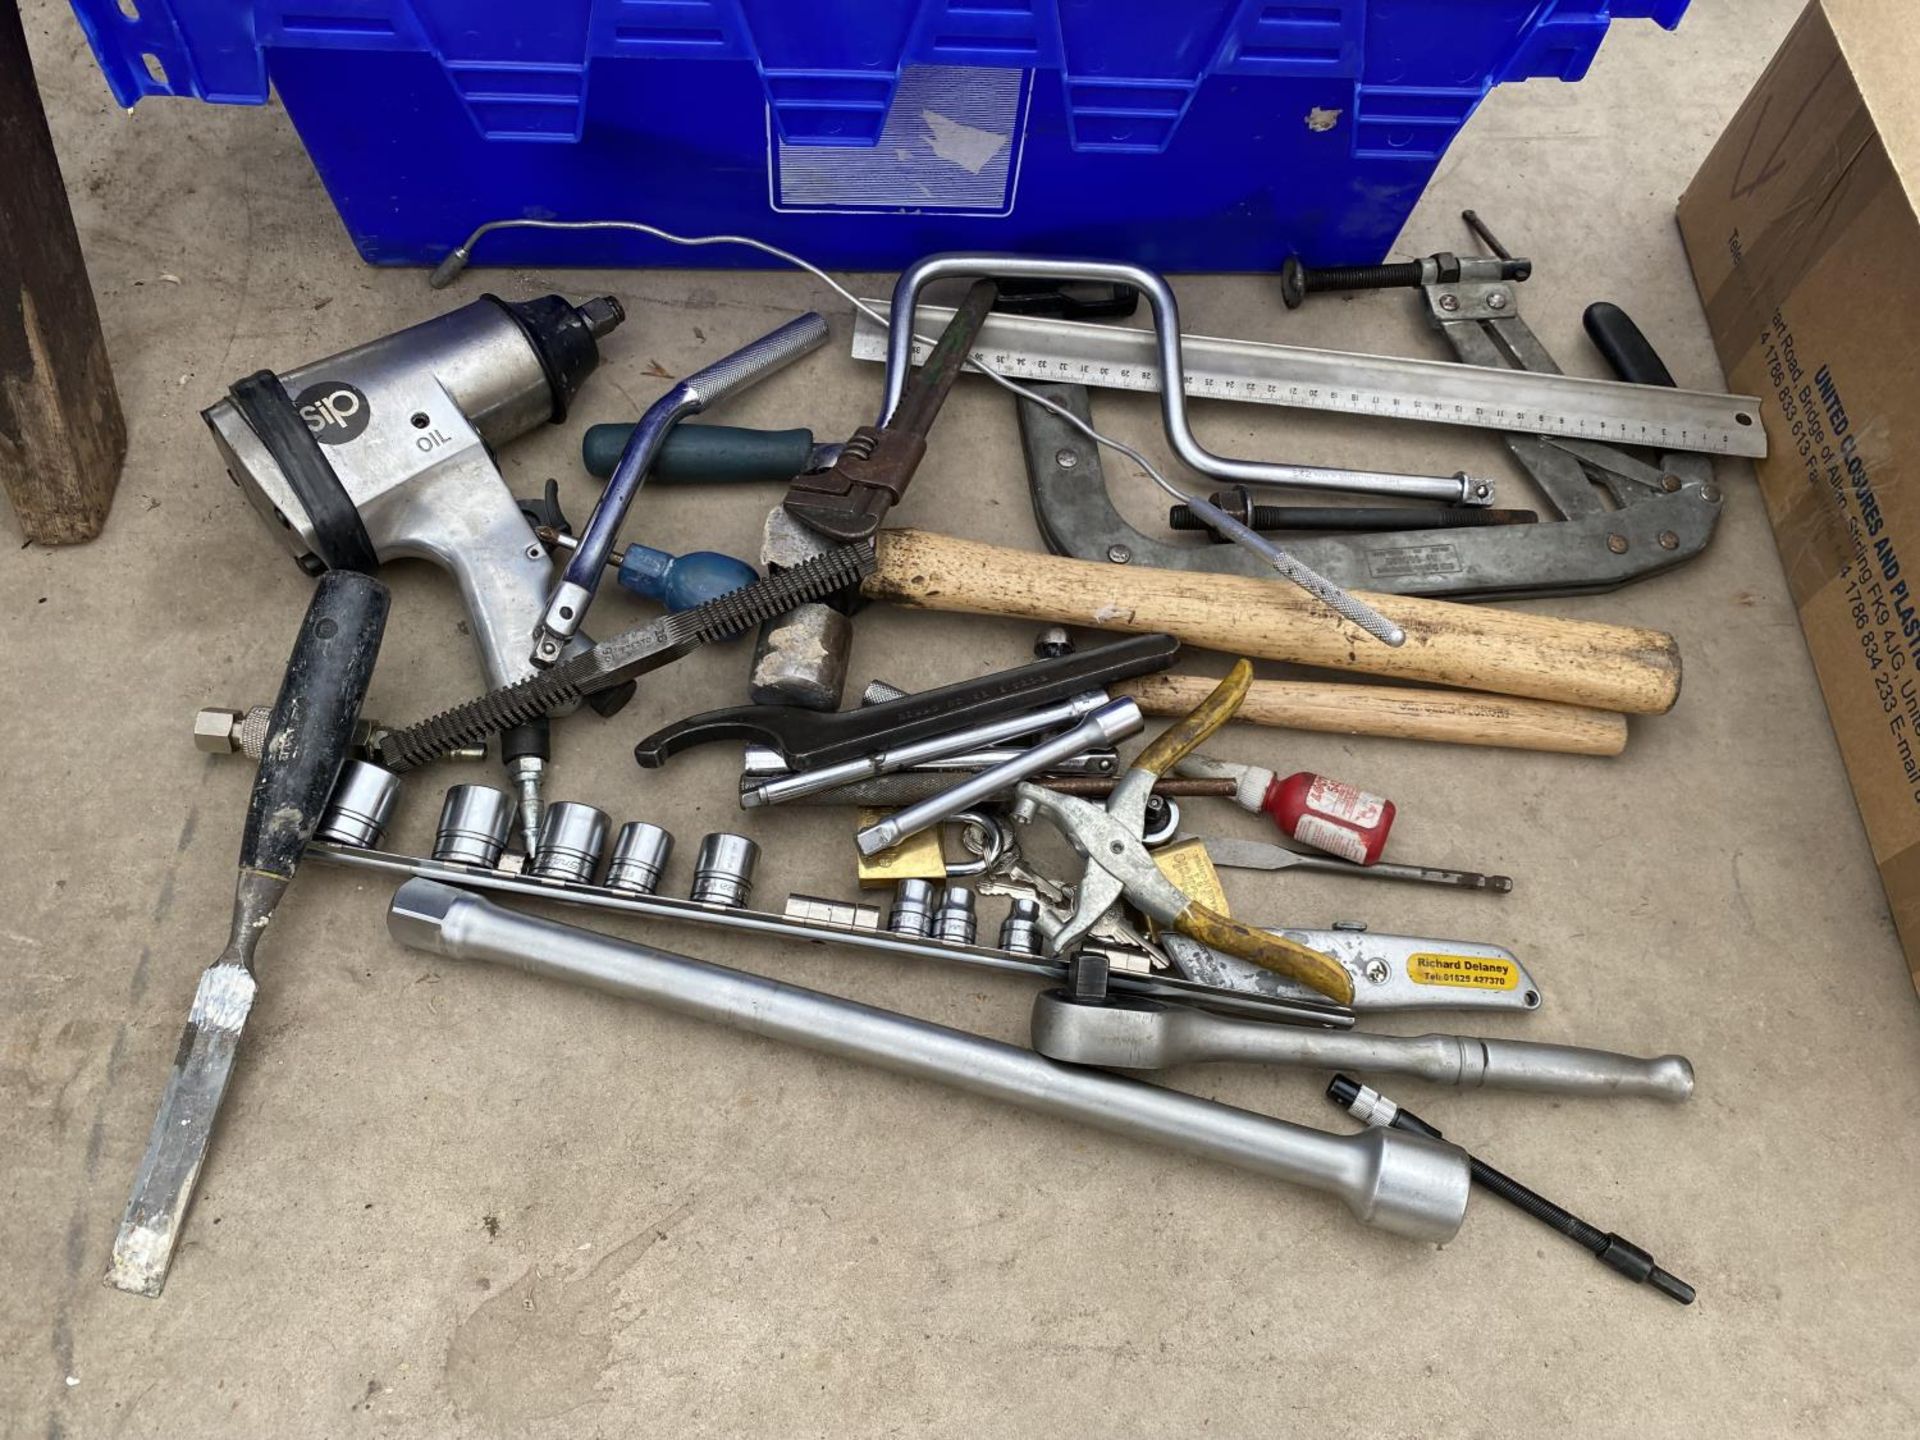 A LARGE ASSORTMENT OF TOOLS TO INCLUDE SOCKETS, A COMPRESSOR IMPACT WRENCH AND A LARGE CLAMP ETC - Image 2 of 3